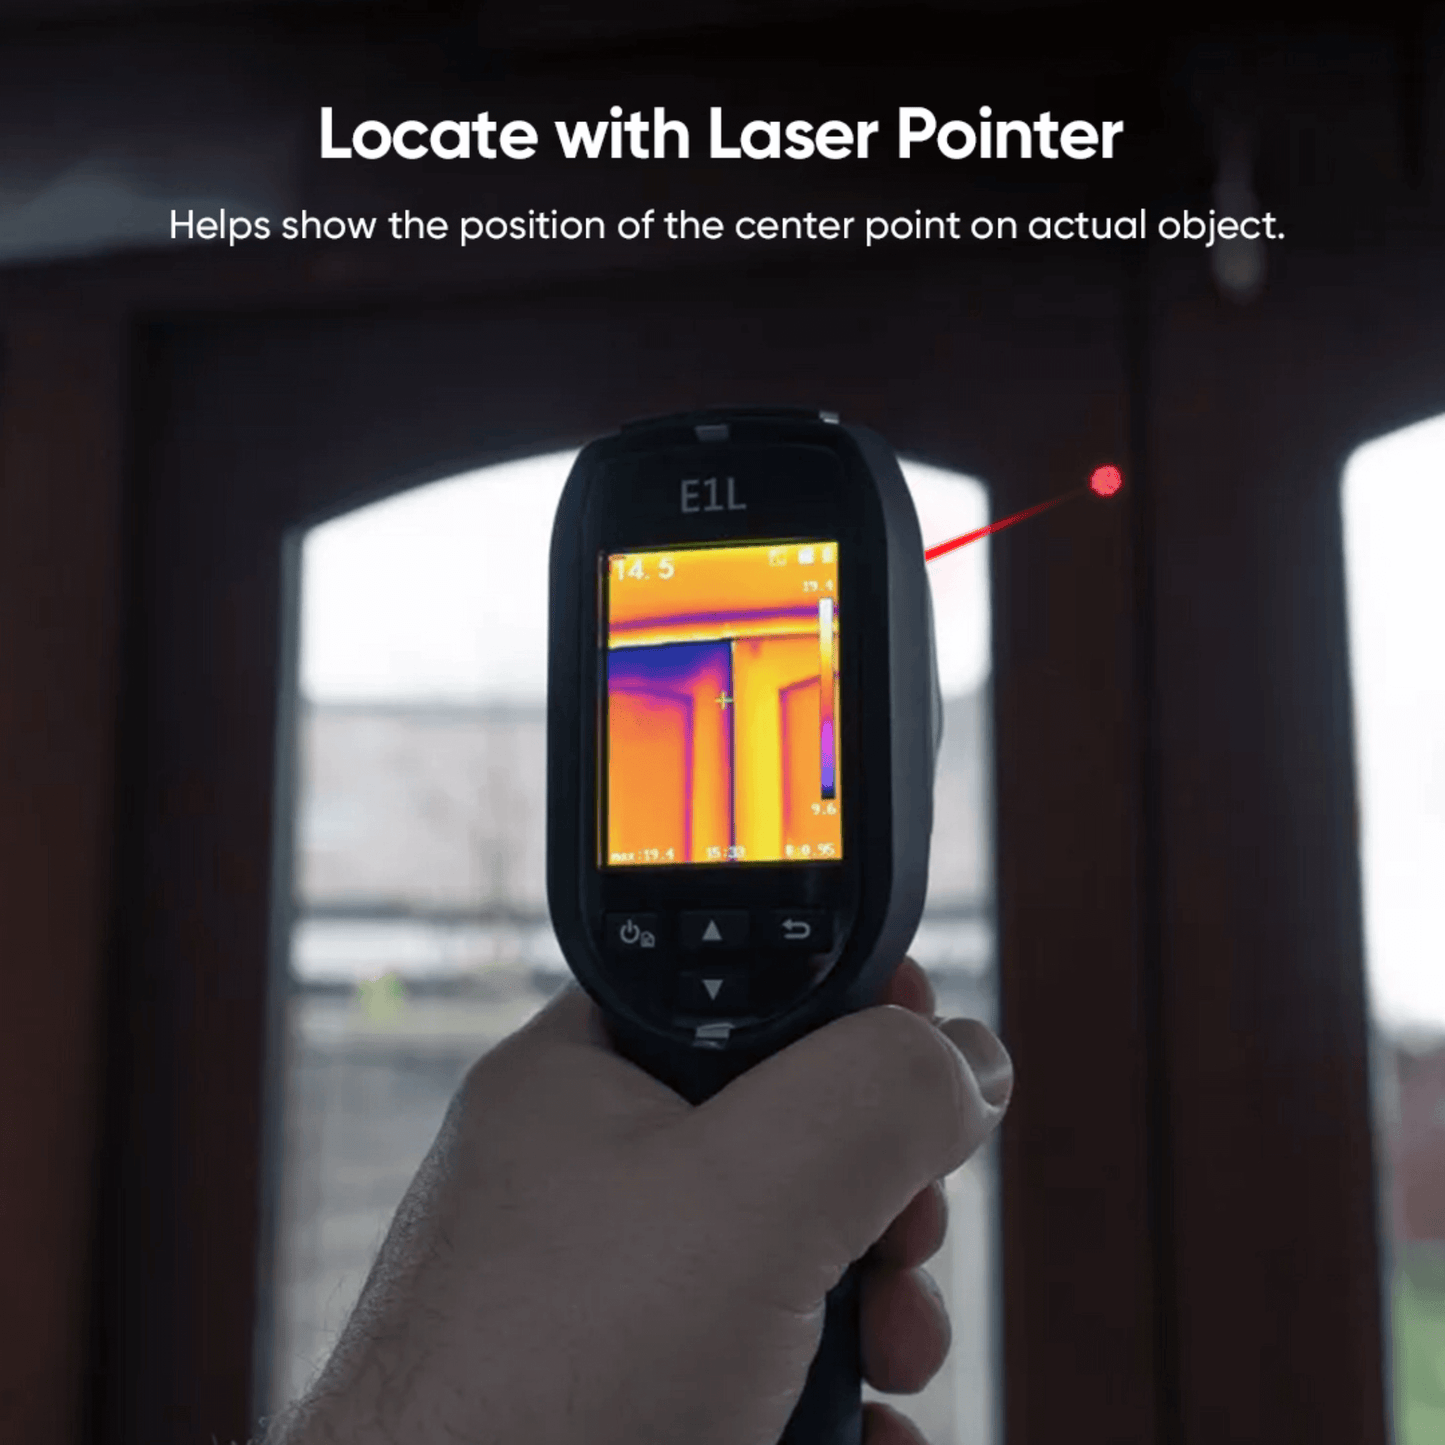 HikMicro E1L Handheld Thermal Camera has a built in laser pointer